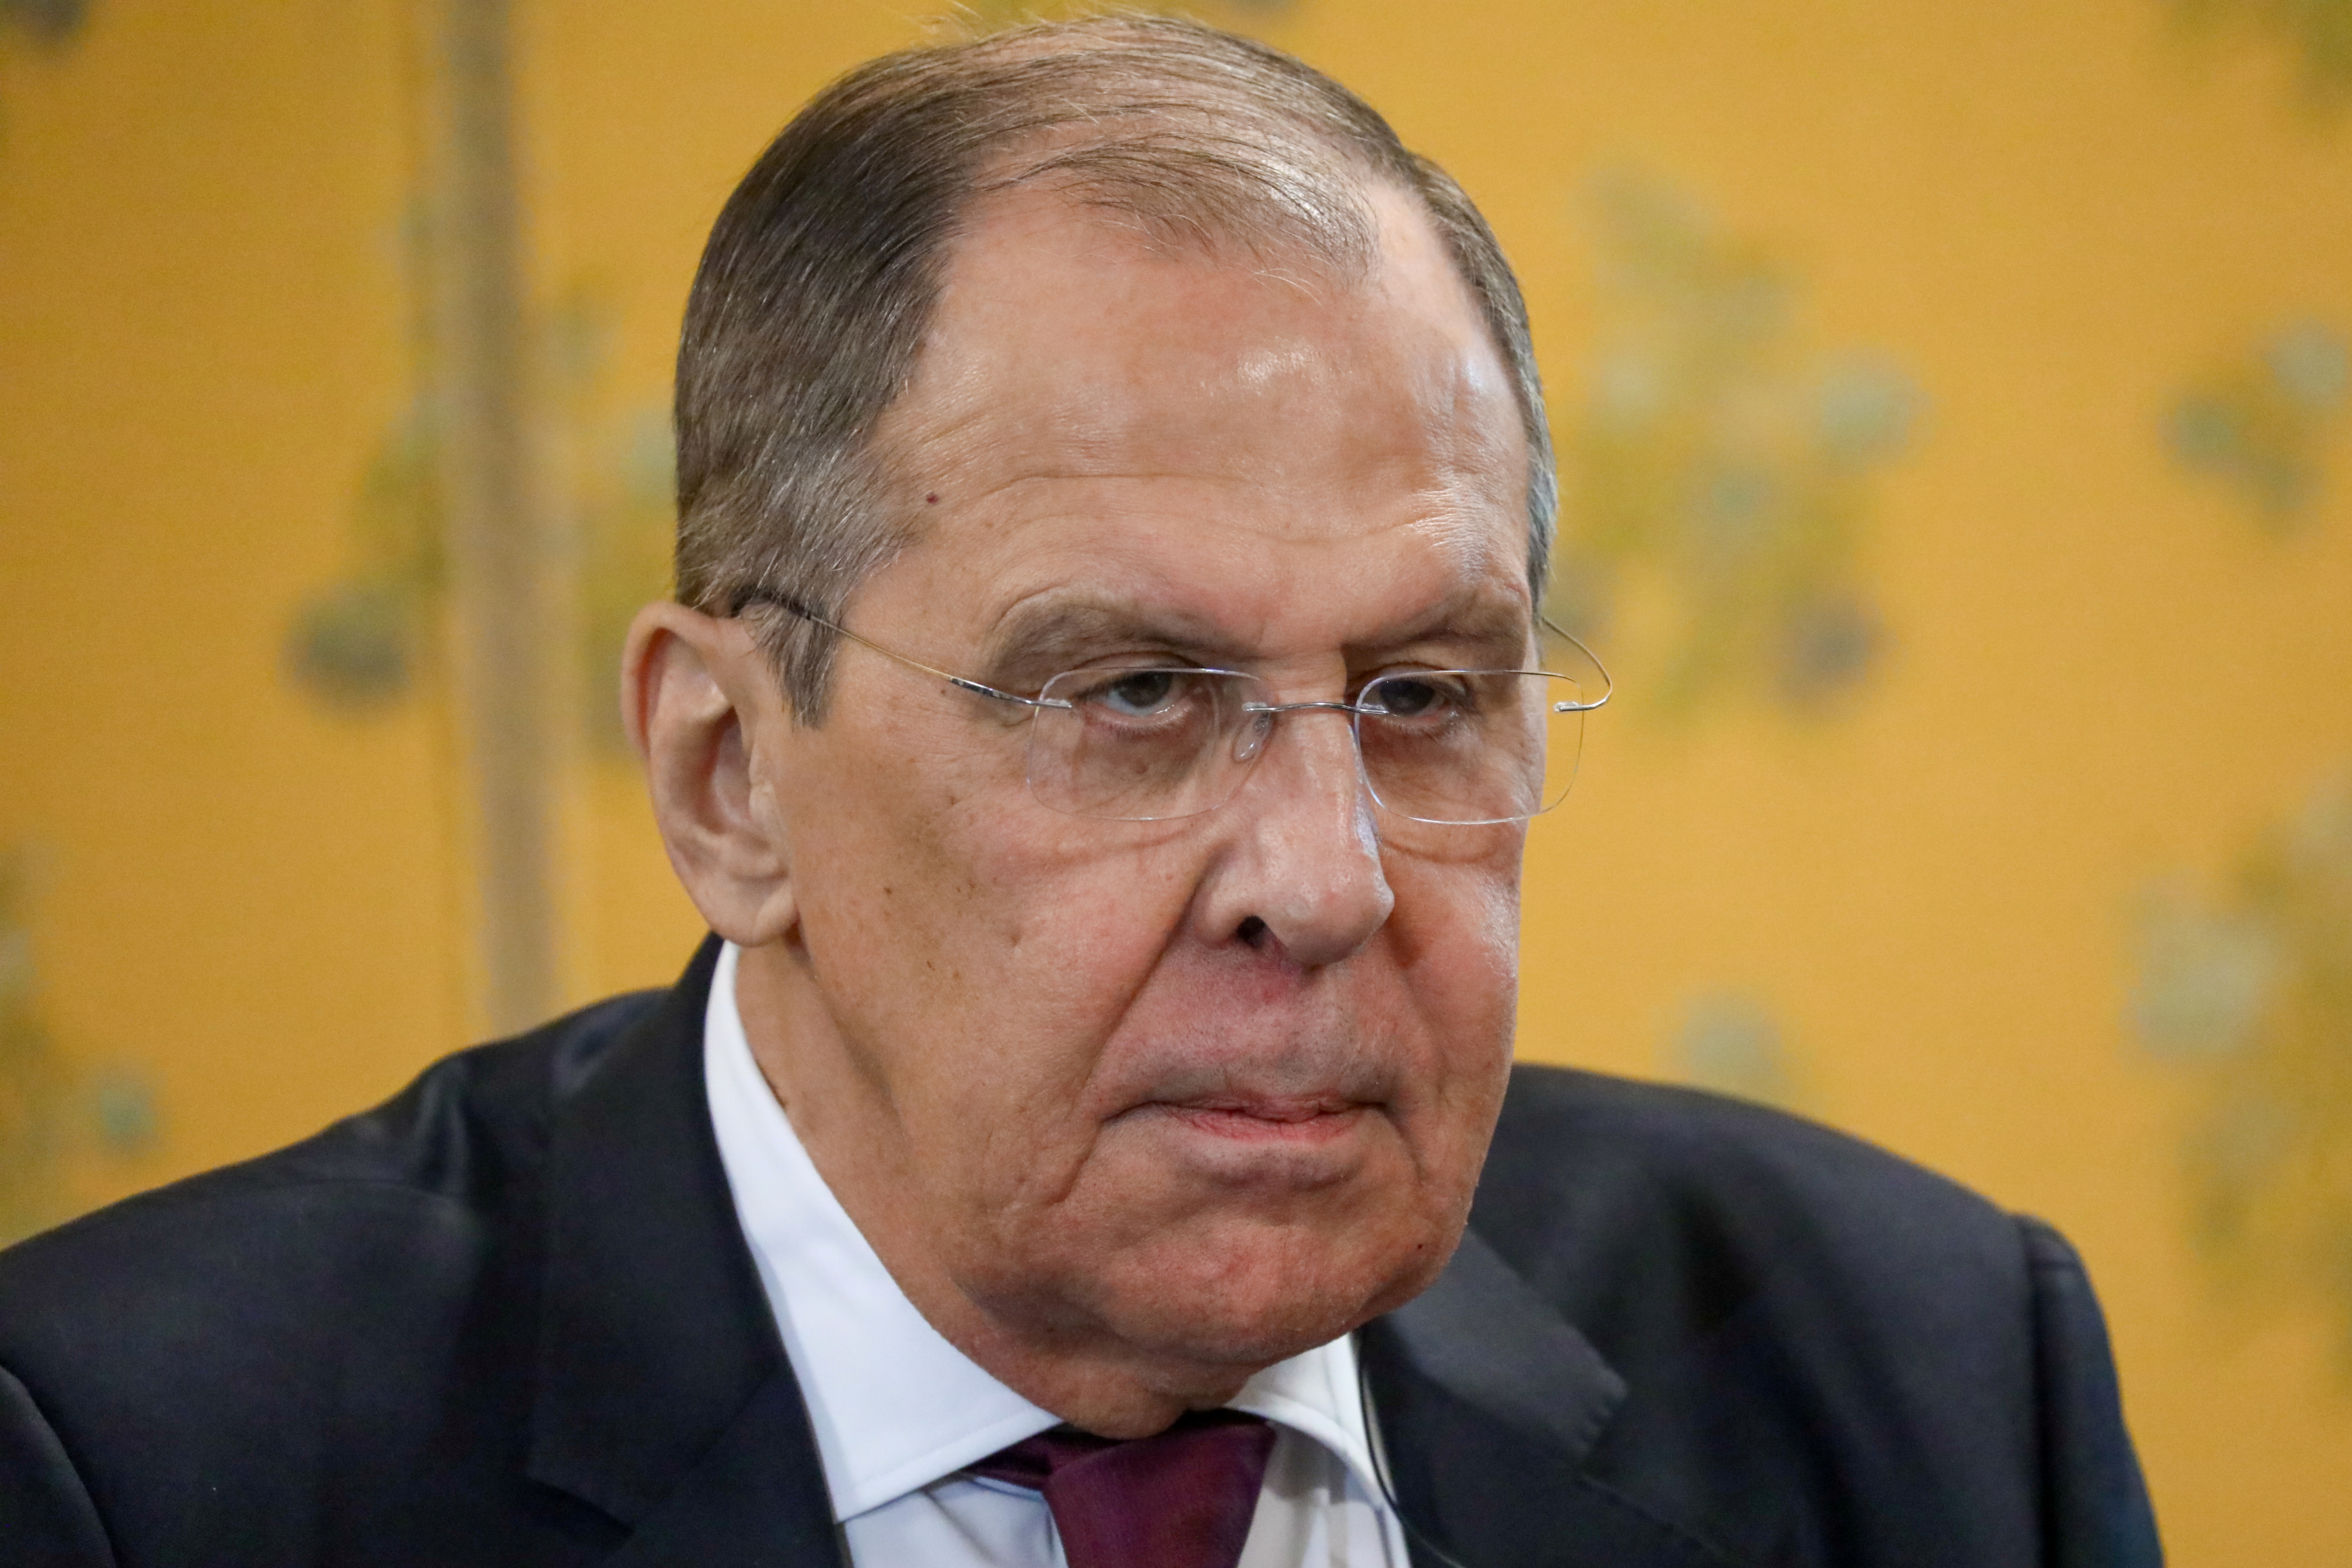 Russian Foreign Minister Sergei Lavrov attends a meeting on the sidelines of the G20 leaders' summit in Rome